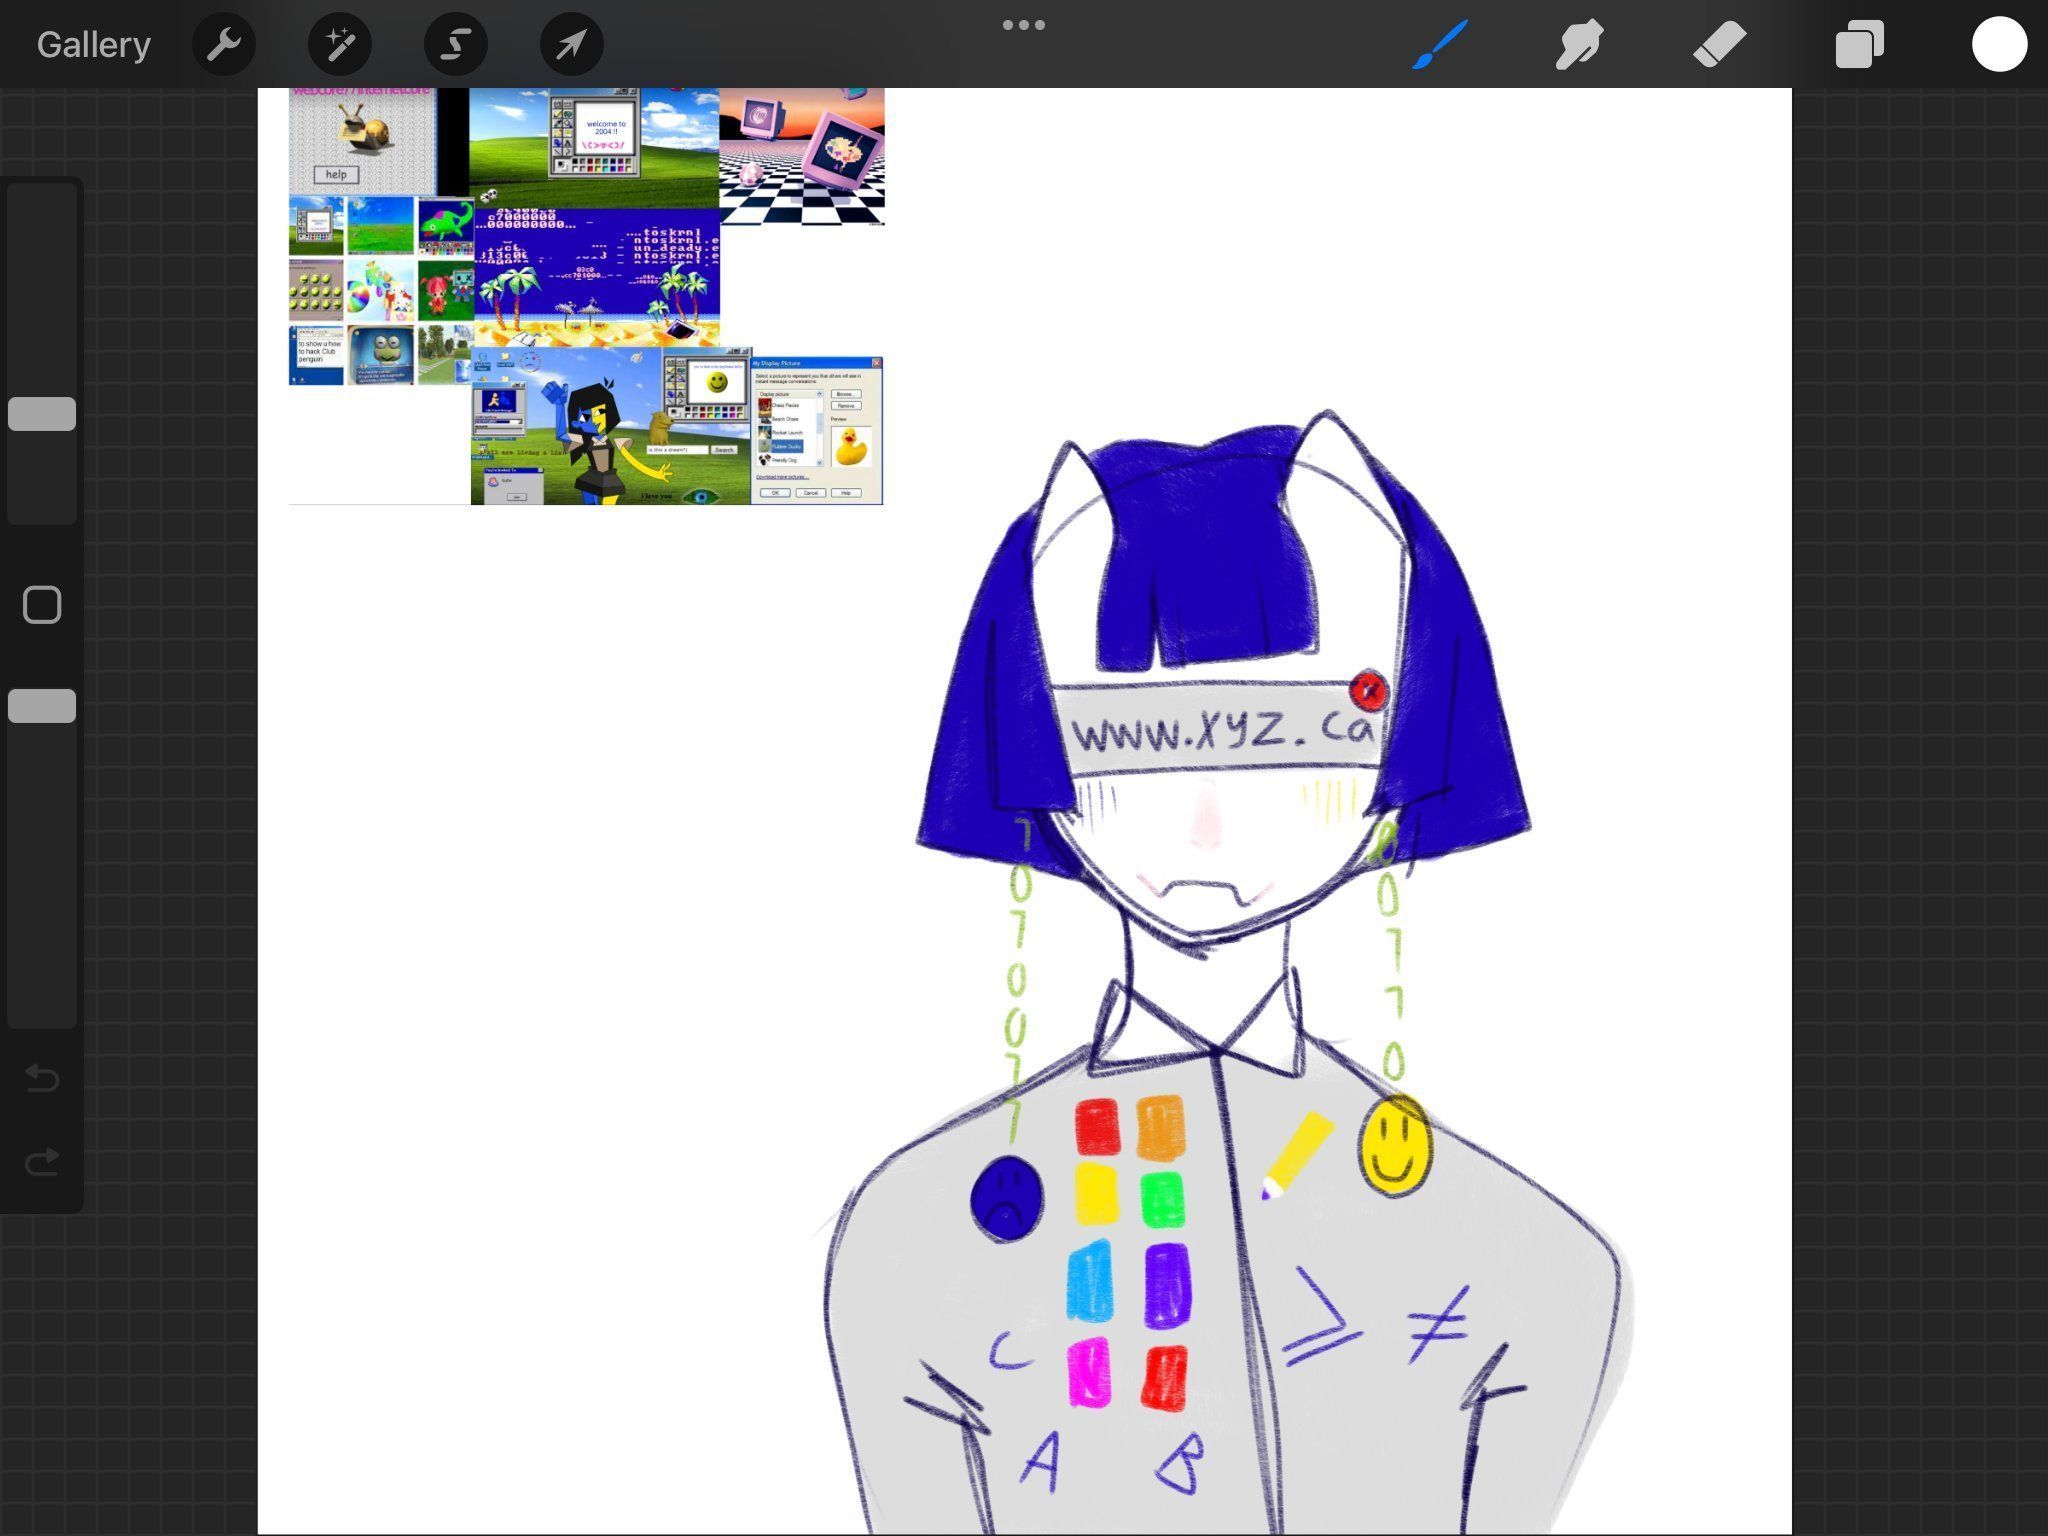 A screenshot of an image being drawn in paint - Internetcore